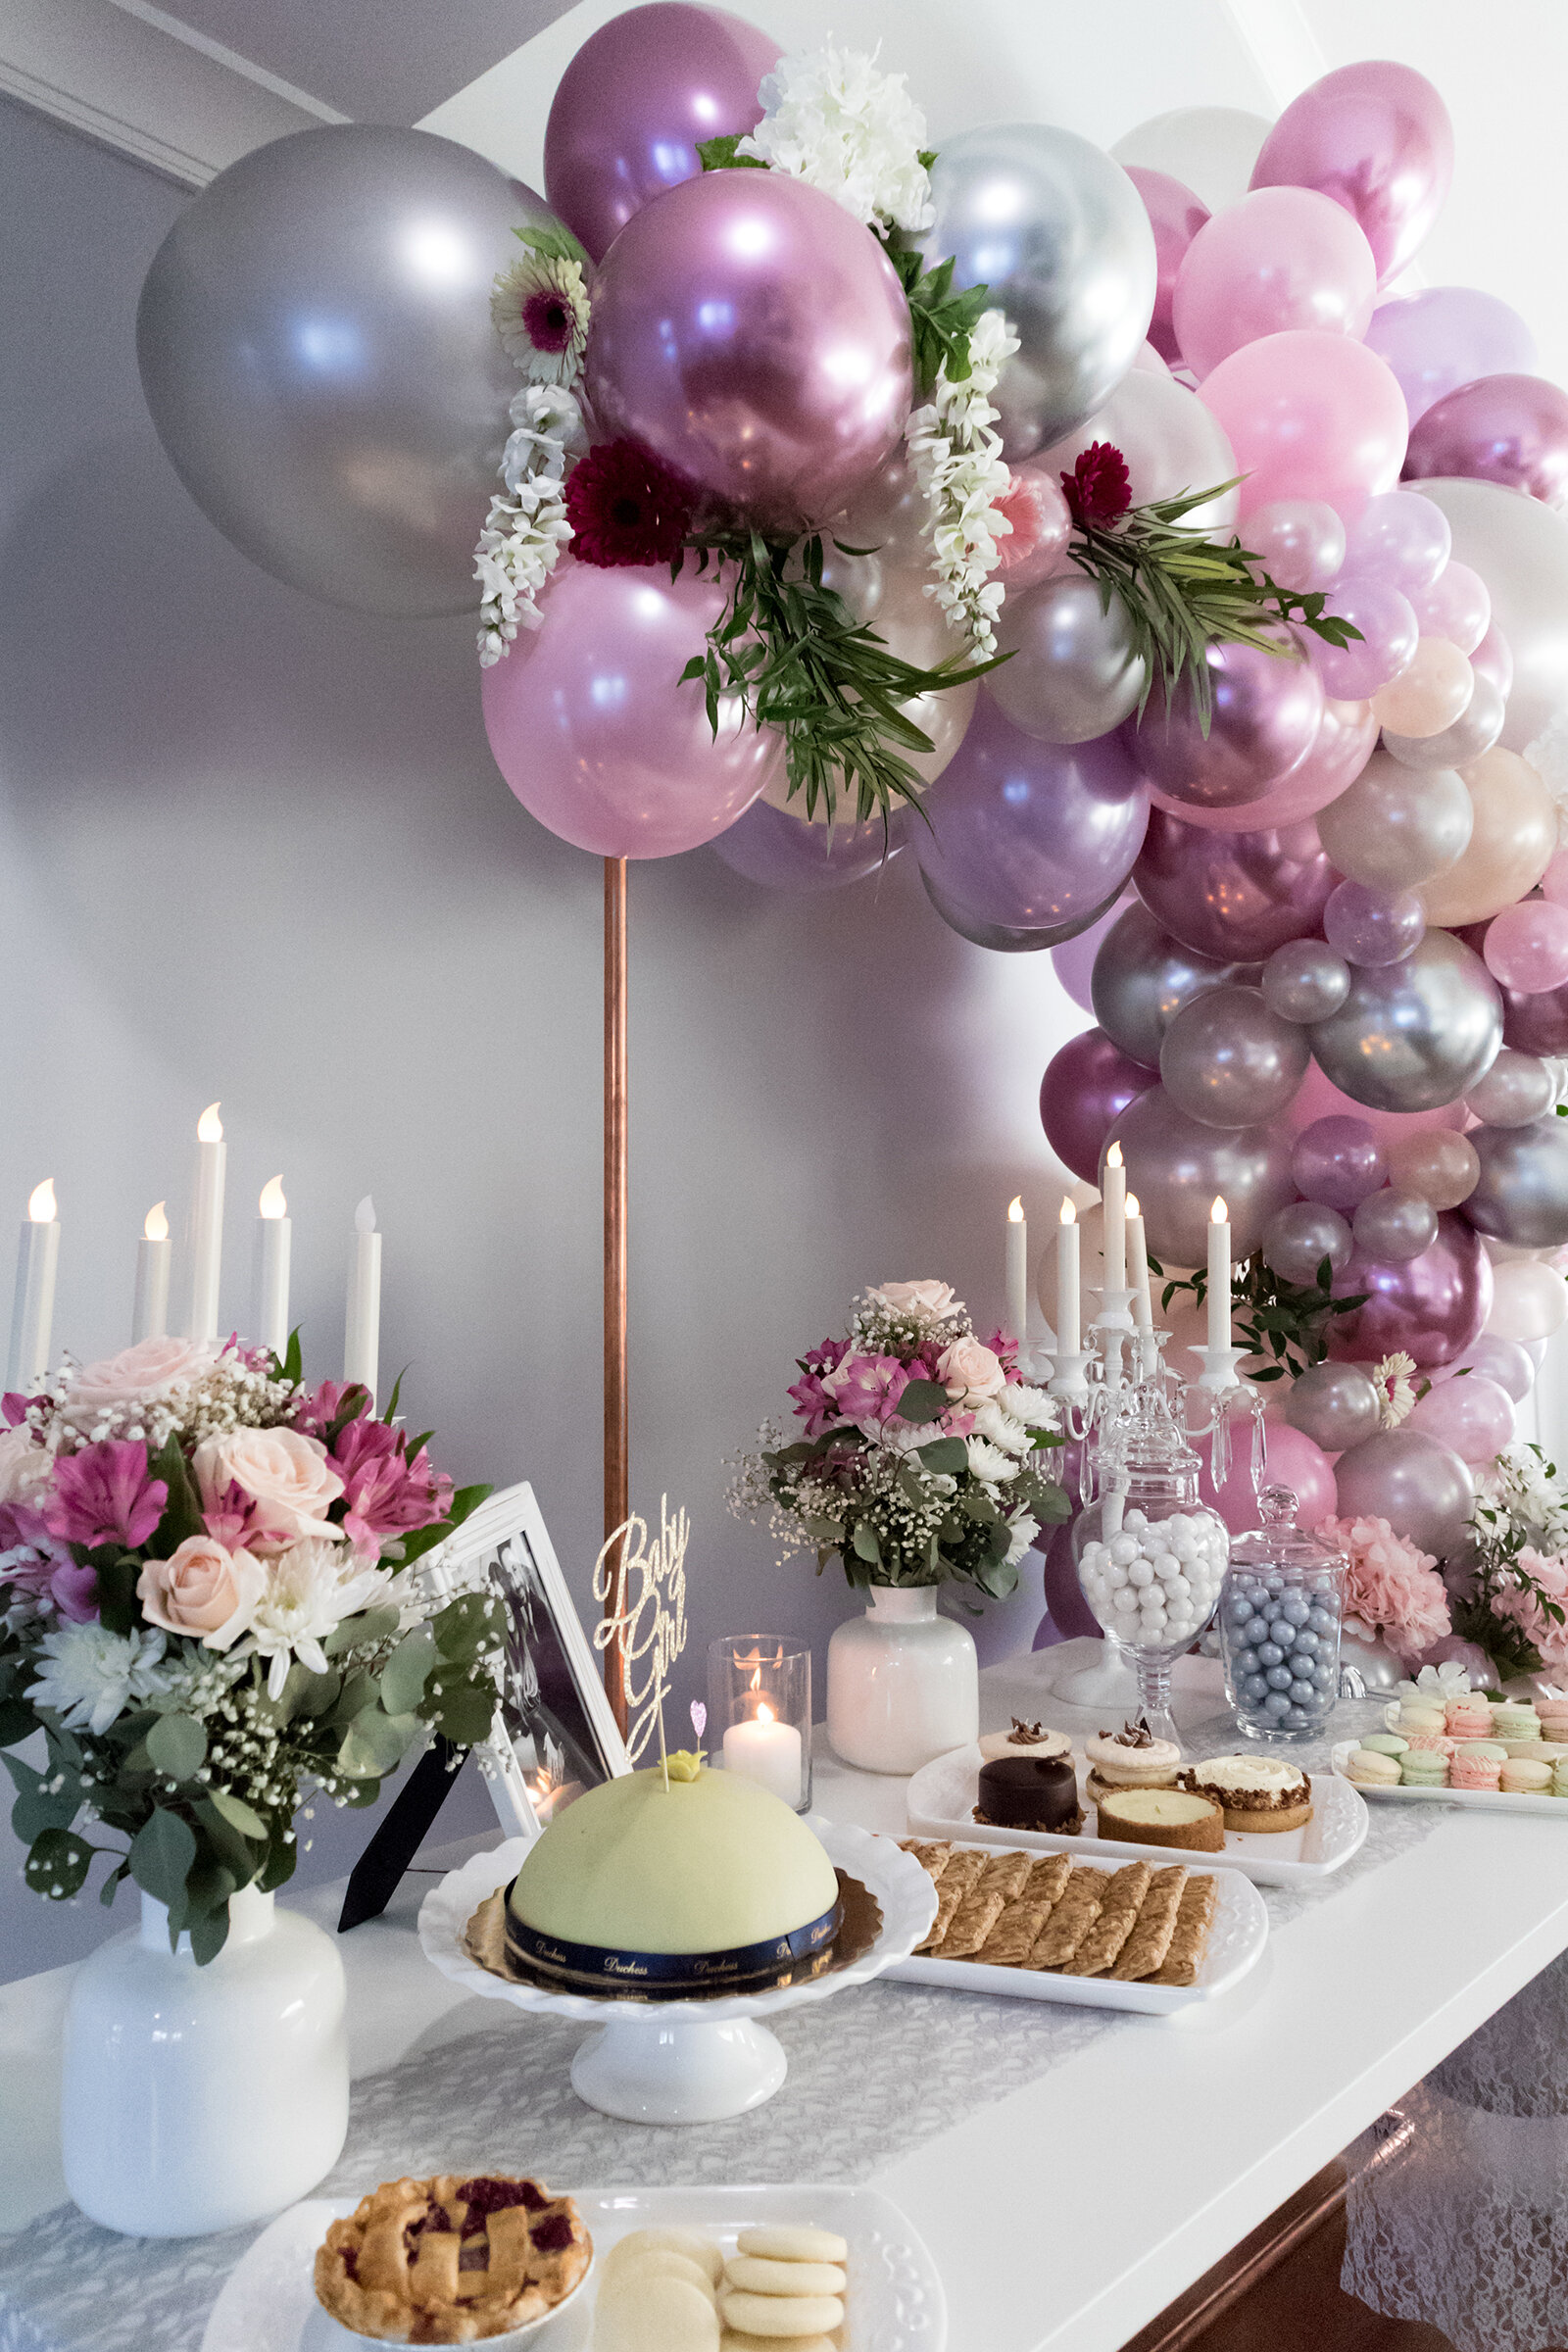 Event and Balloon decoration